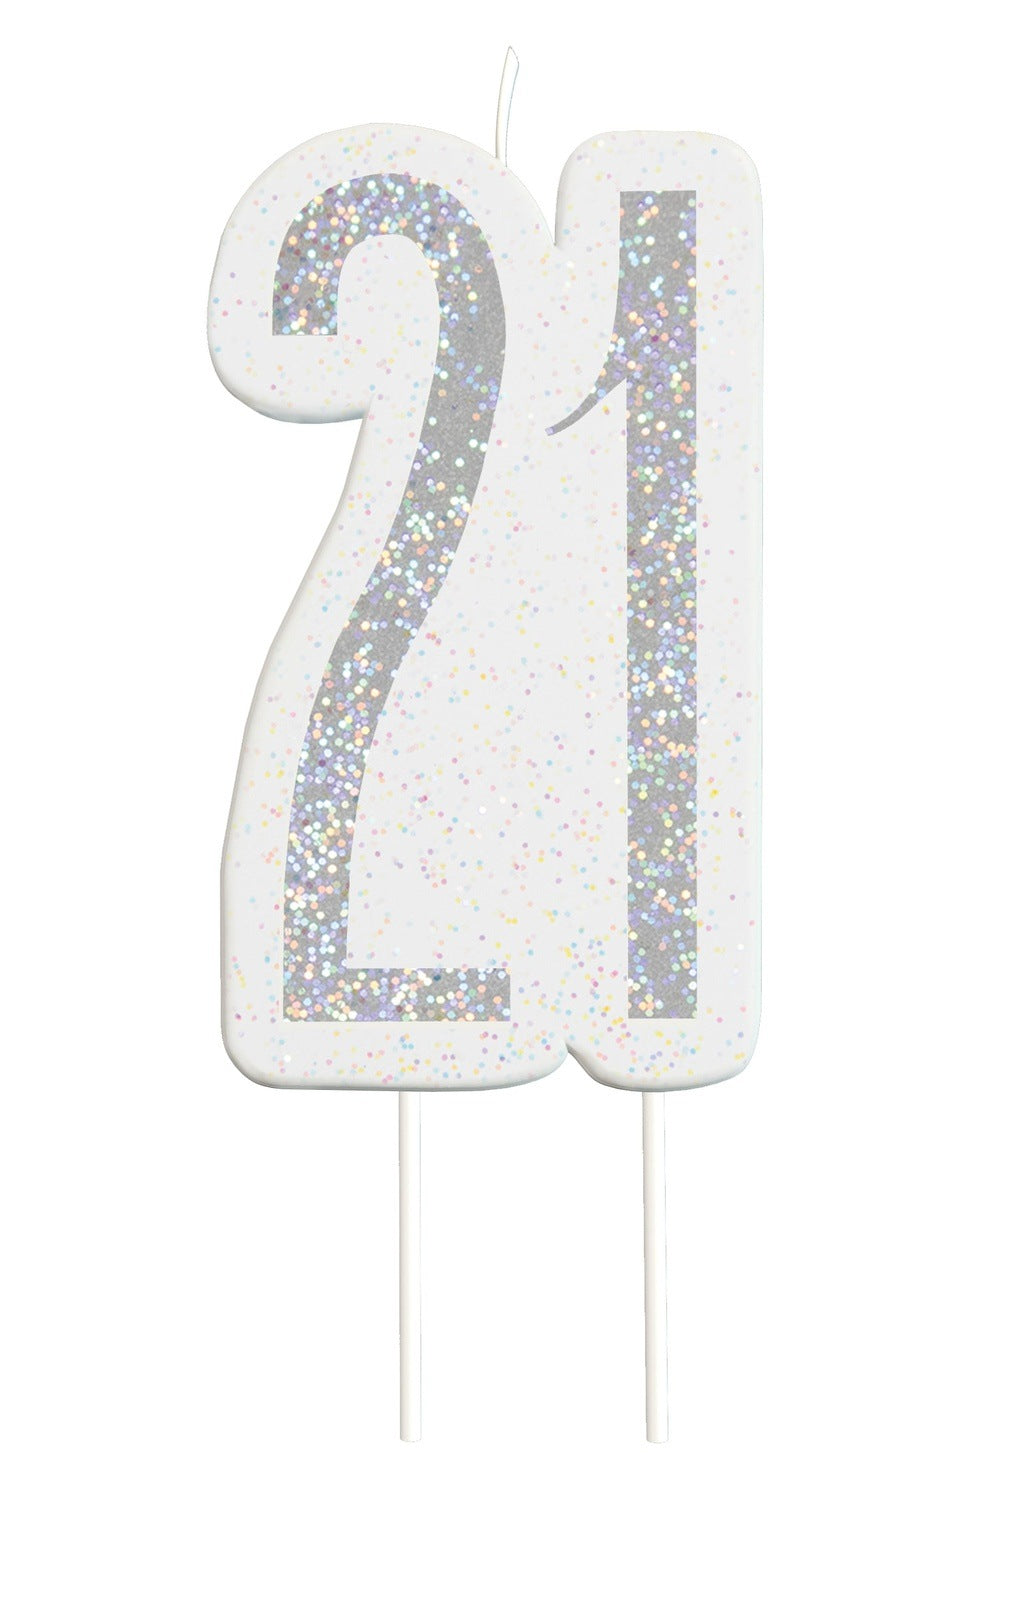 Black & Silver Number 21 Numeral Candle